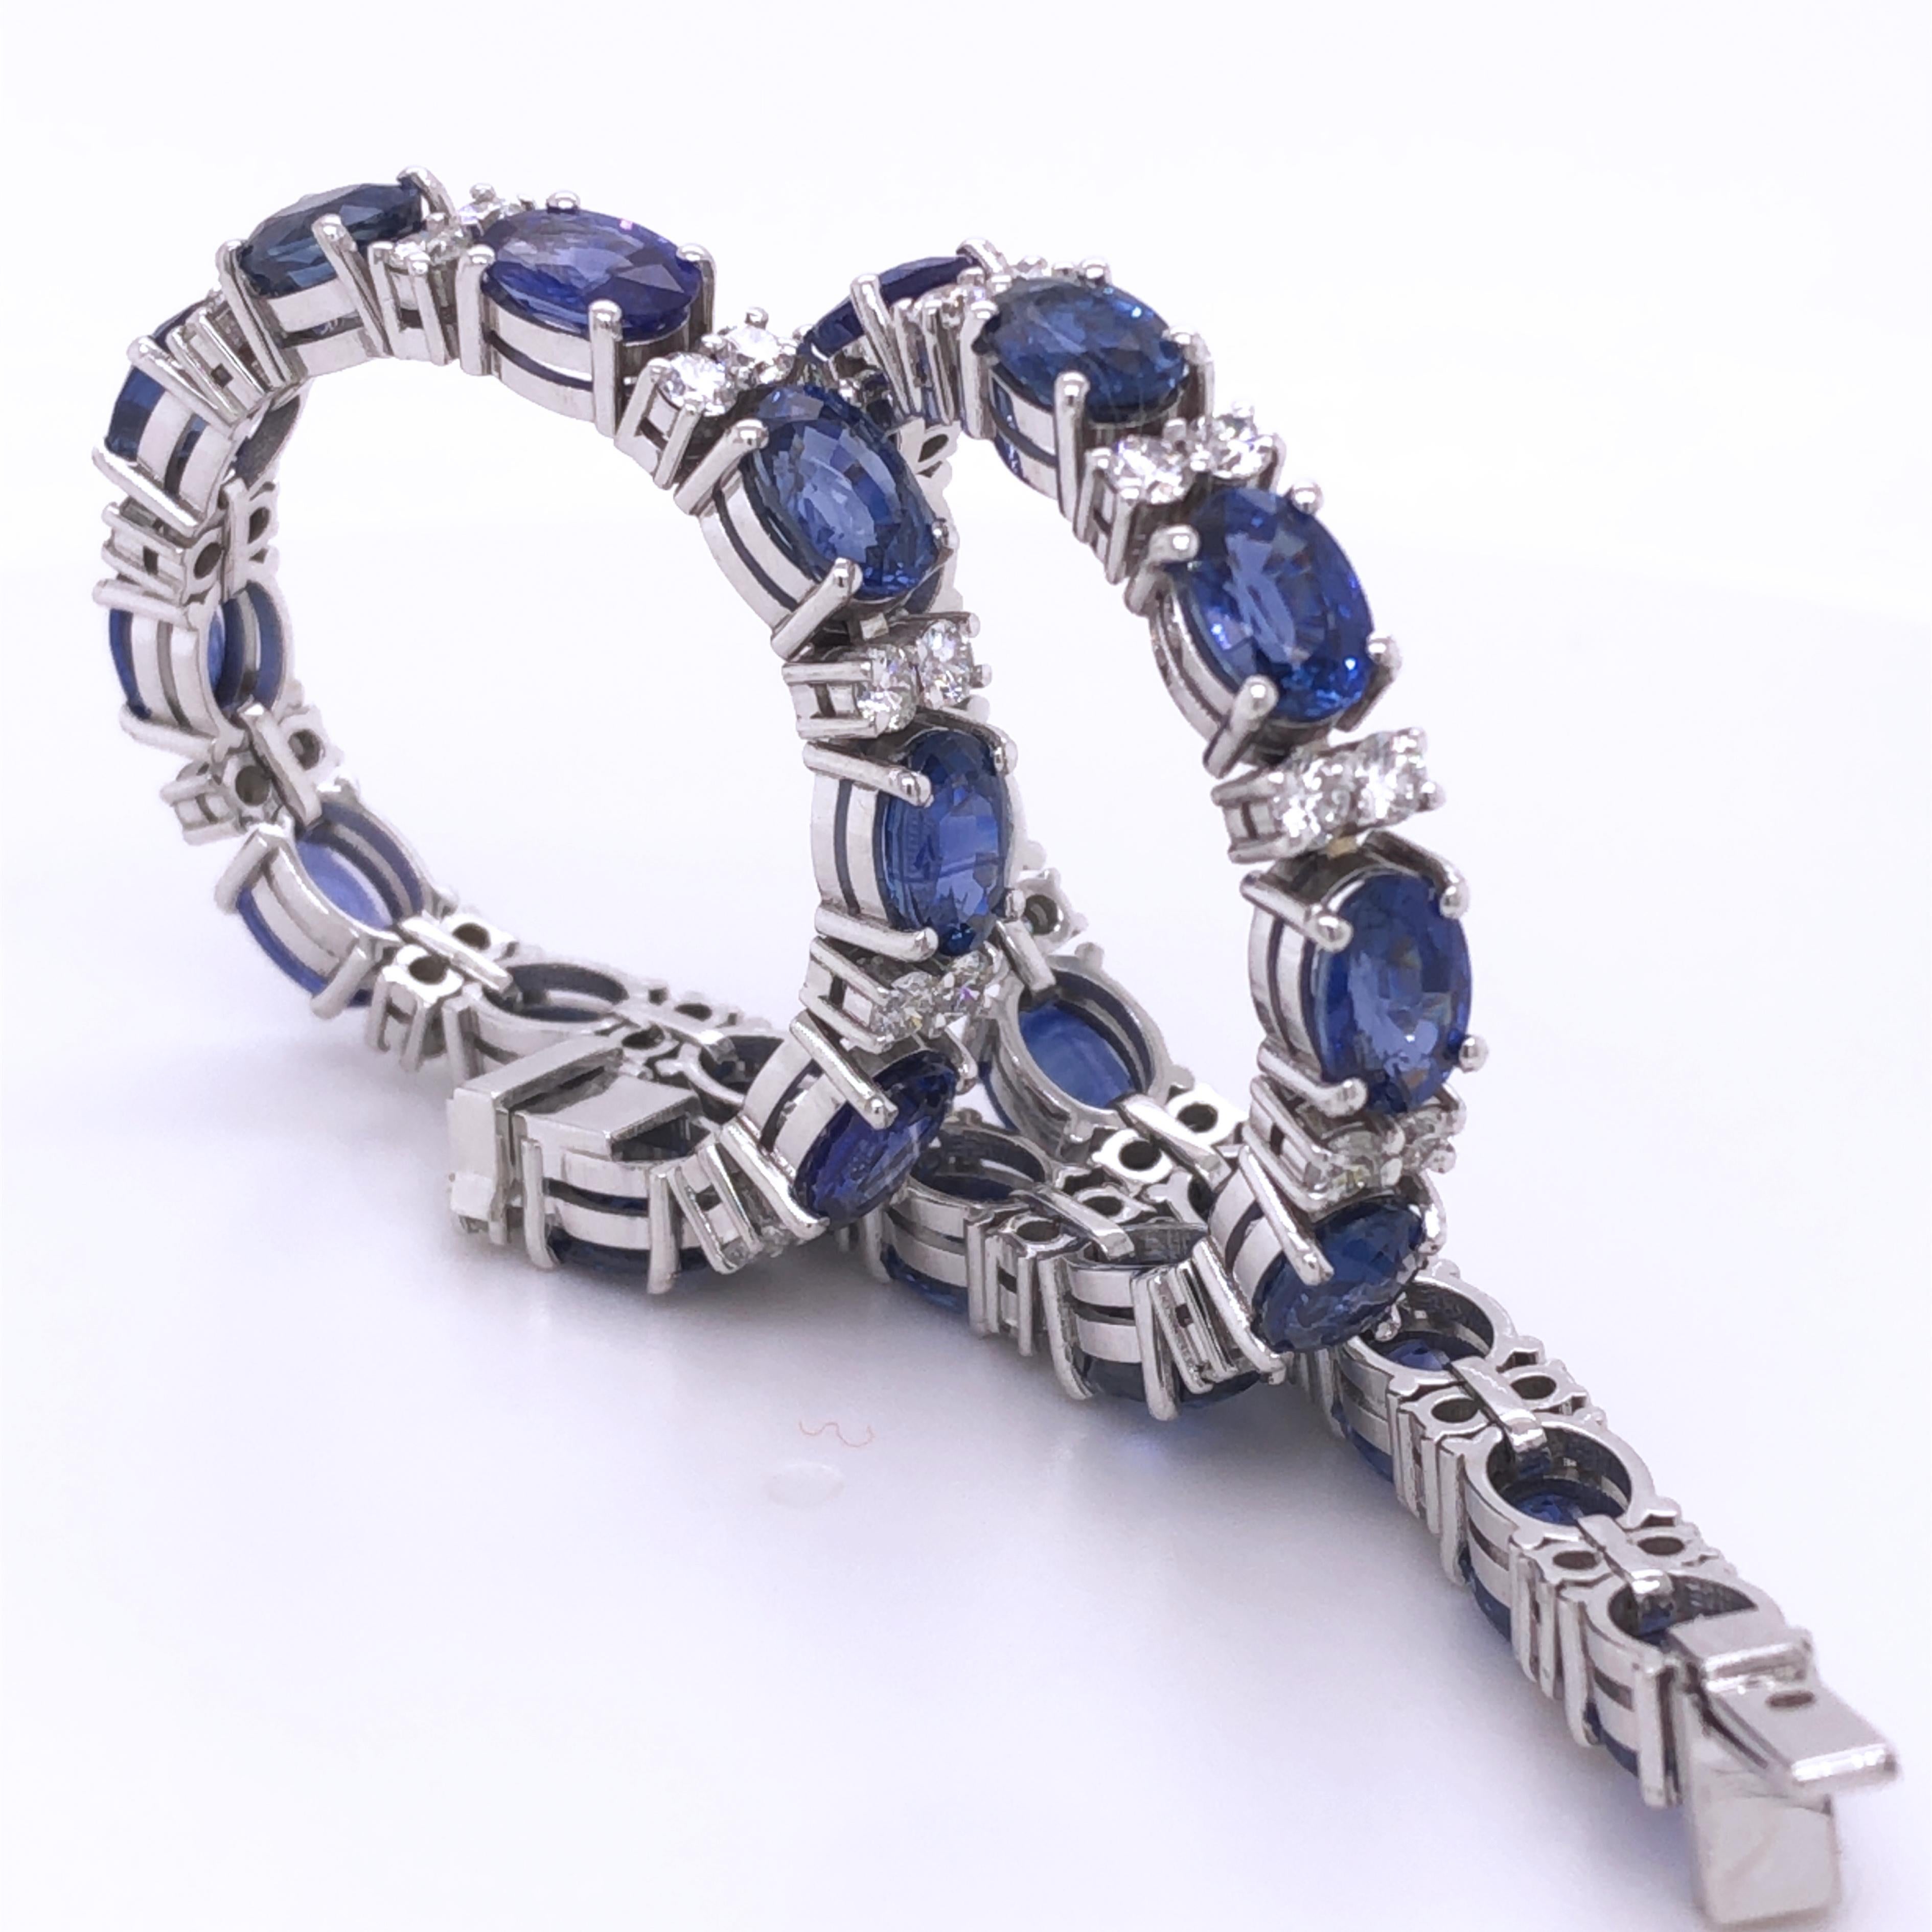 Timeless Hancrafted Tennis Bracelet featuring 23 Natural Oval Ceylon Sapphire, in a 1.79Kt Top Quality Brilliant Cut White Diamond, in a 0.49OzT 18kt White Gold Setting. 
Diamond's Grade is D-E, VvS1.
A detailed gemmological certificate is